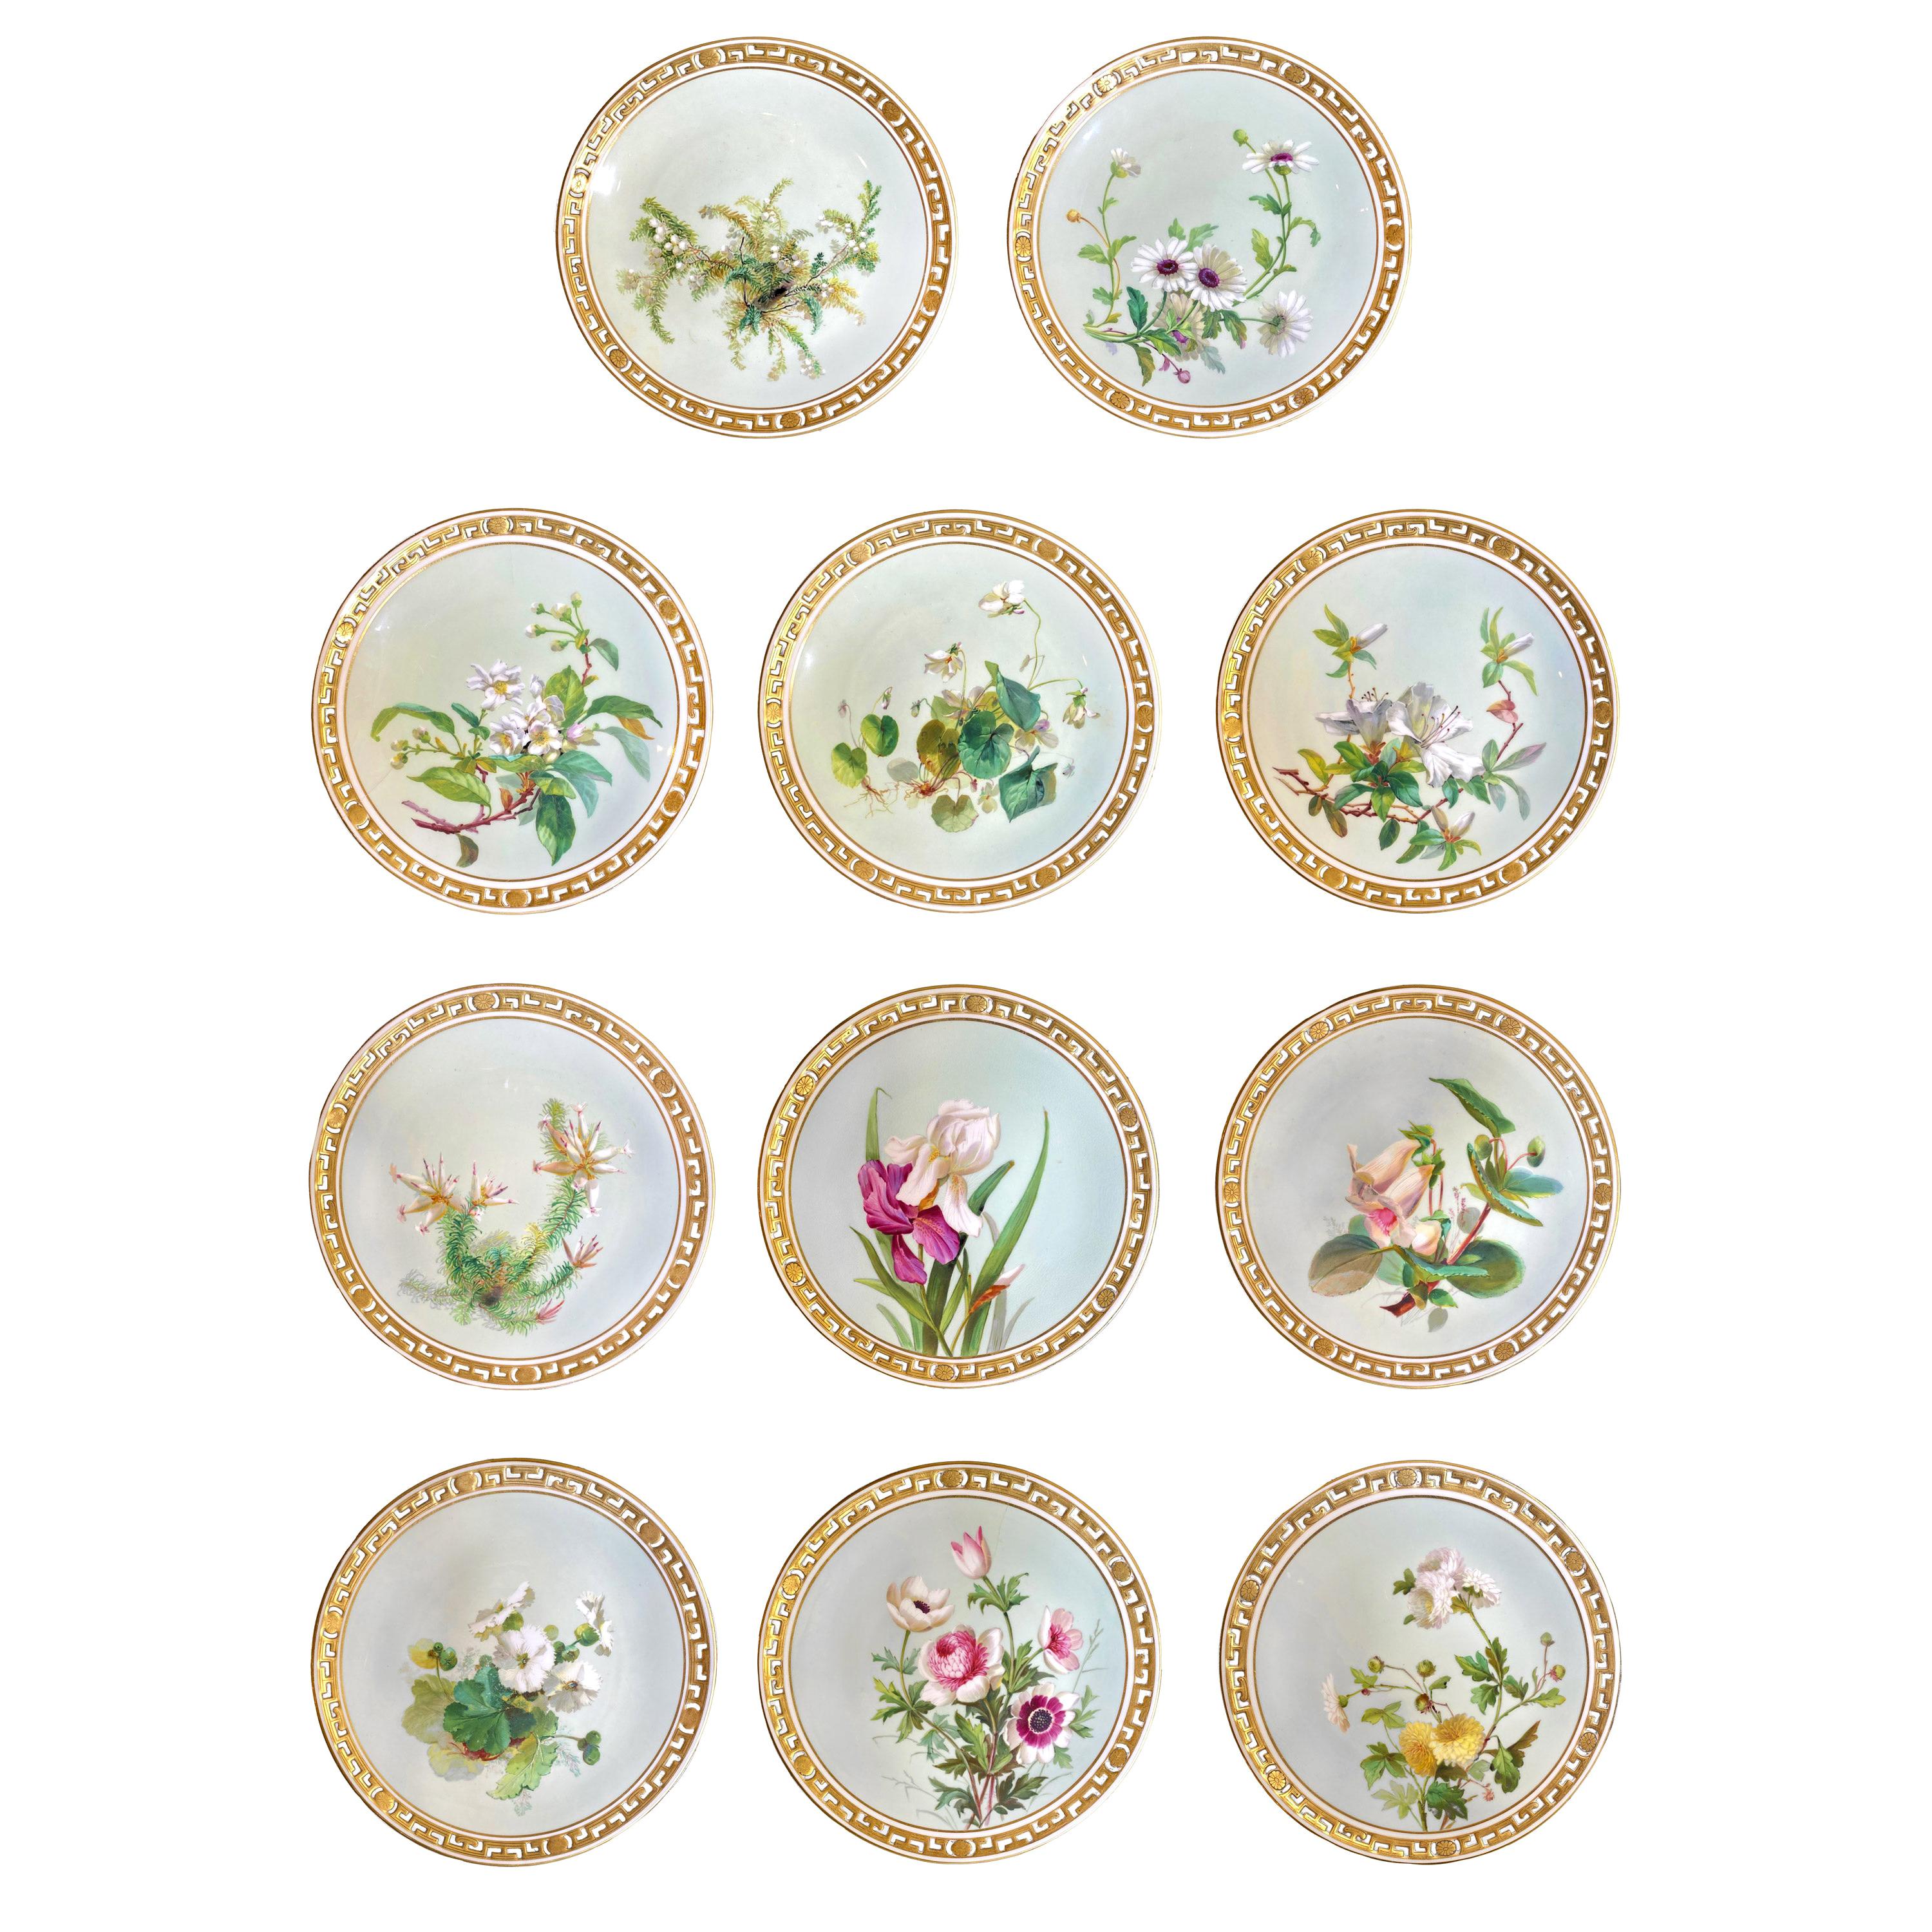 Set of 11 dinner plates in Minton Porcelain. Each plate is decorated with and hand painted flower on a green-blue background framed by a gold filet. The edge of the plate is openwork with a Greek style pattern alternated with some small flowers and